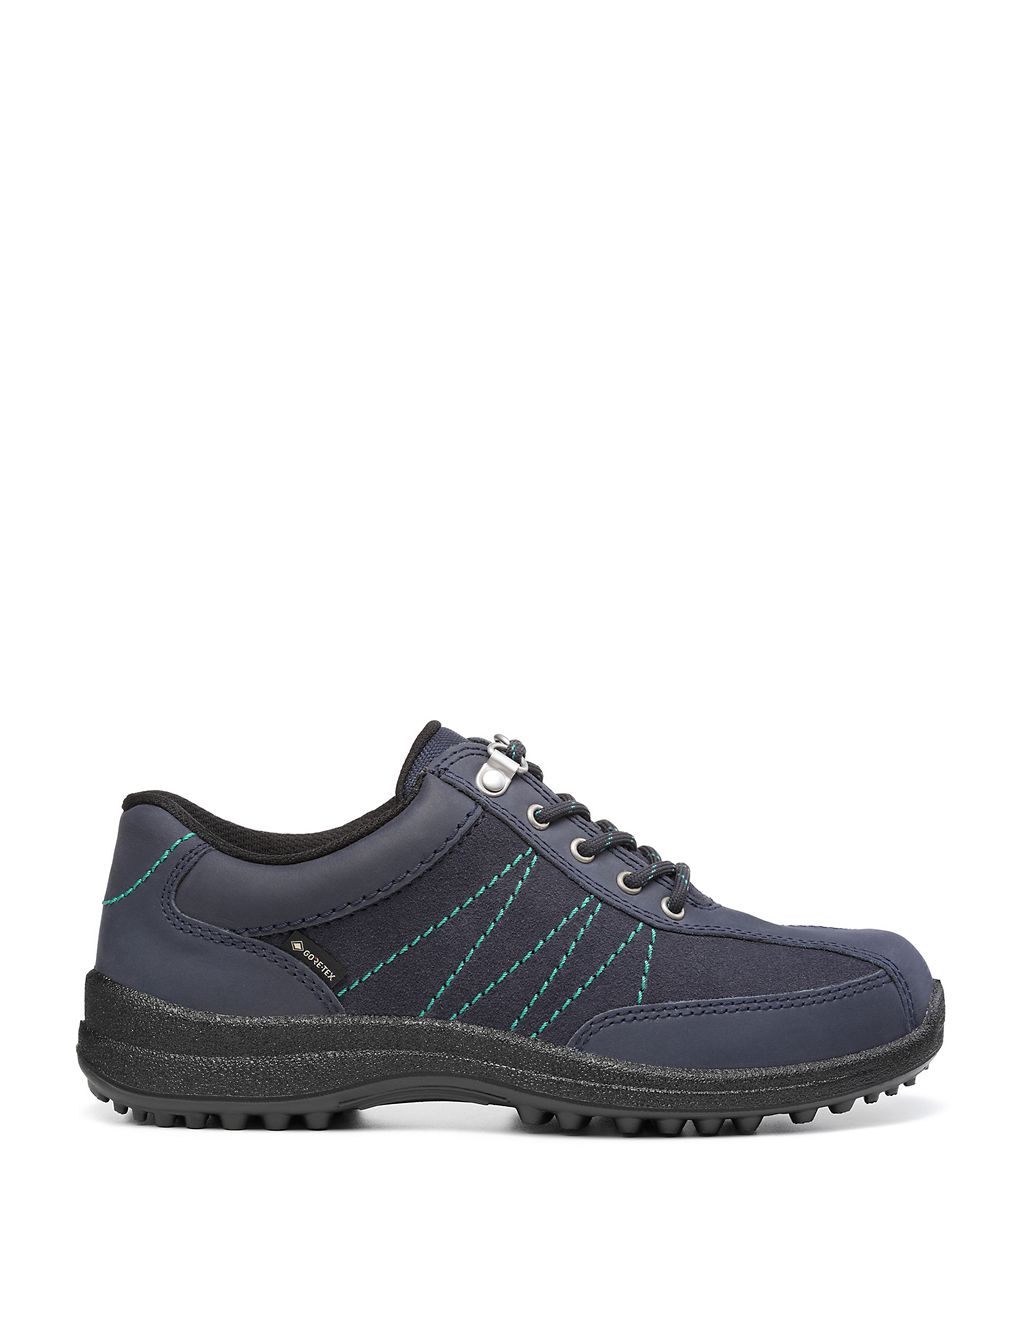 Mist Gore-Tex Suede Lace Up Walking Shoes 1 of 1